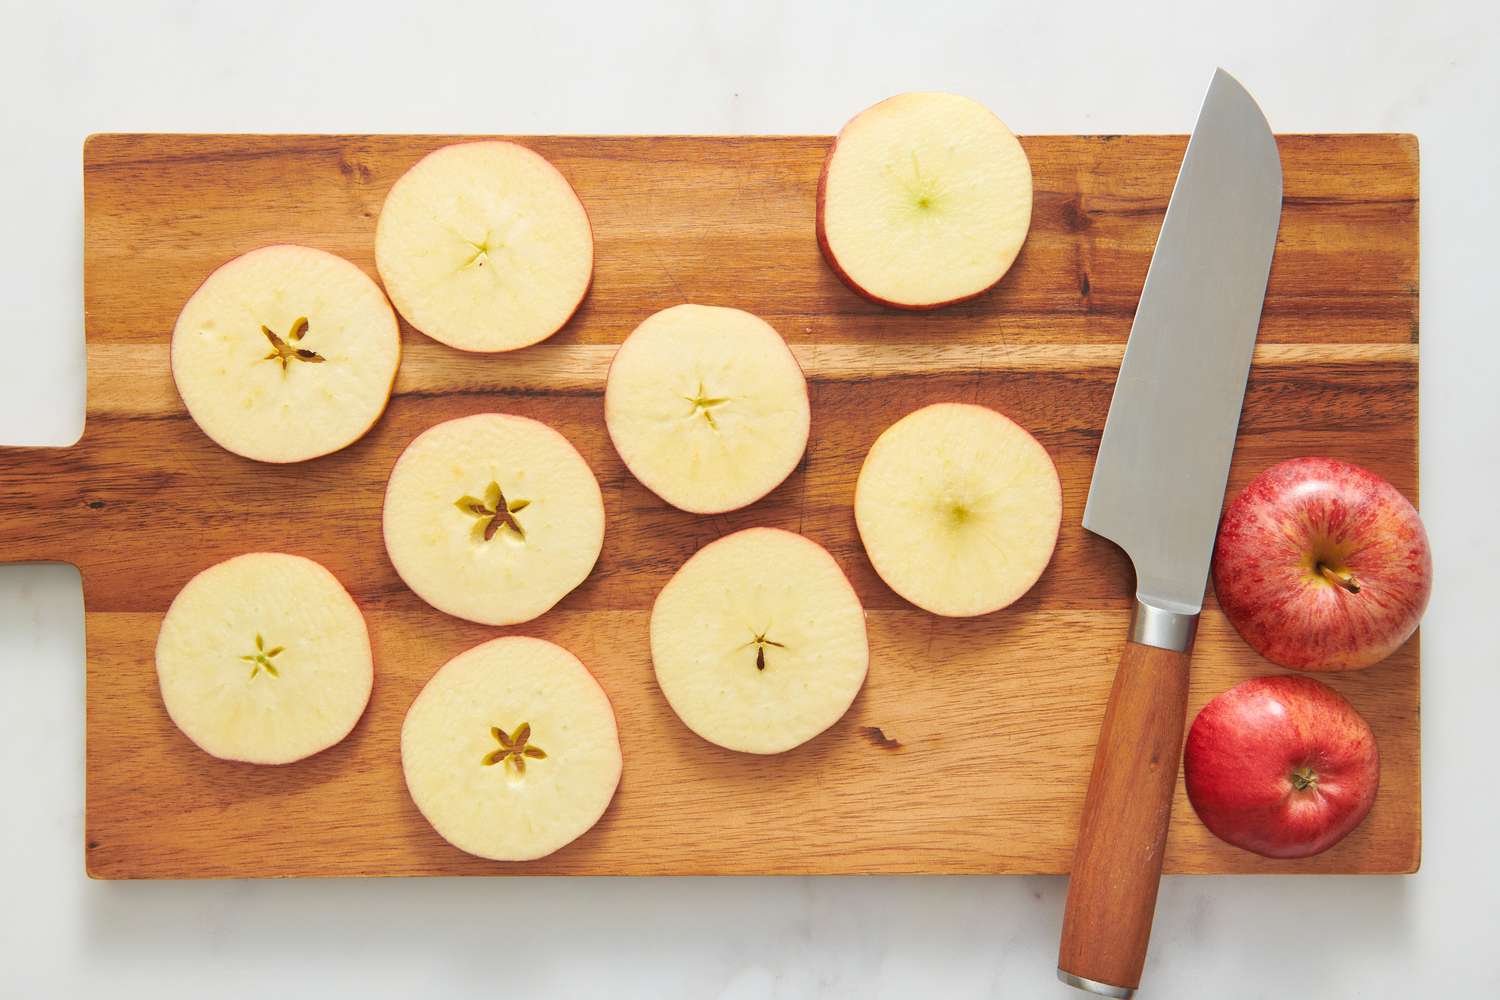 A cutting board with large, thin round slices of apples